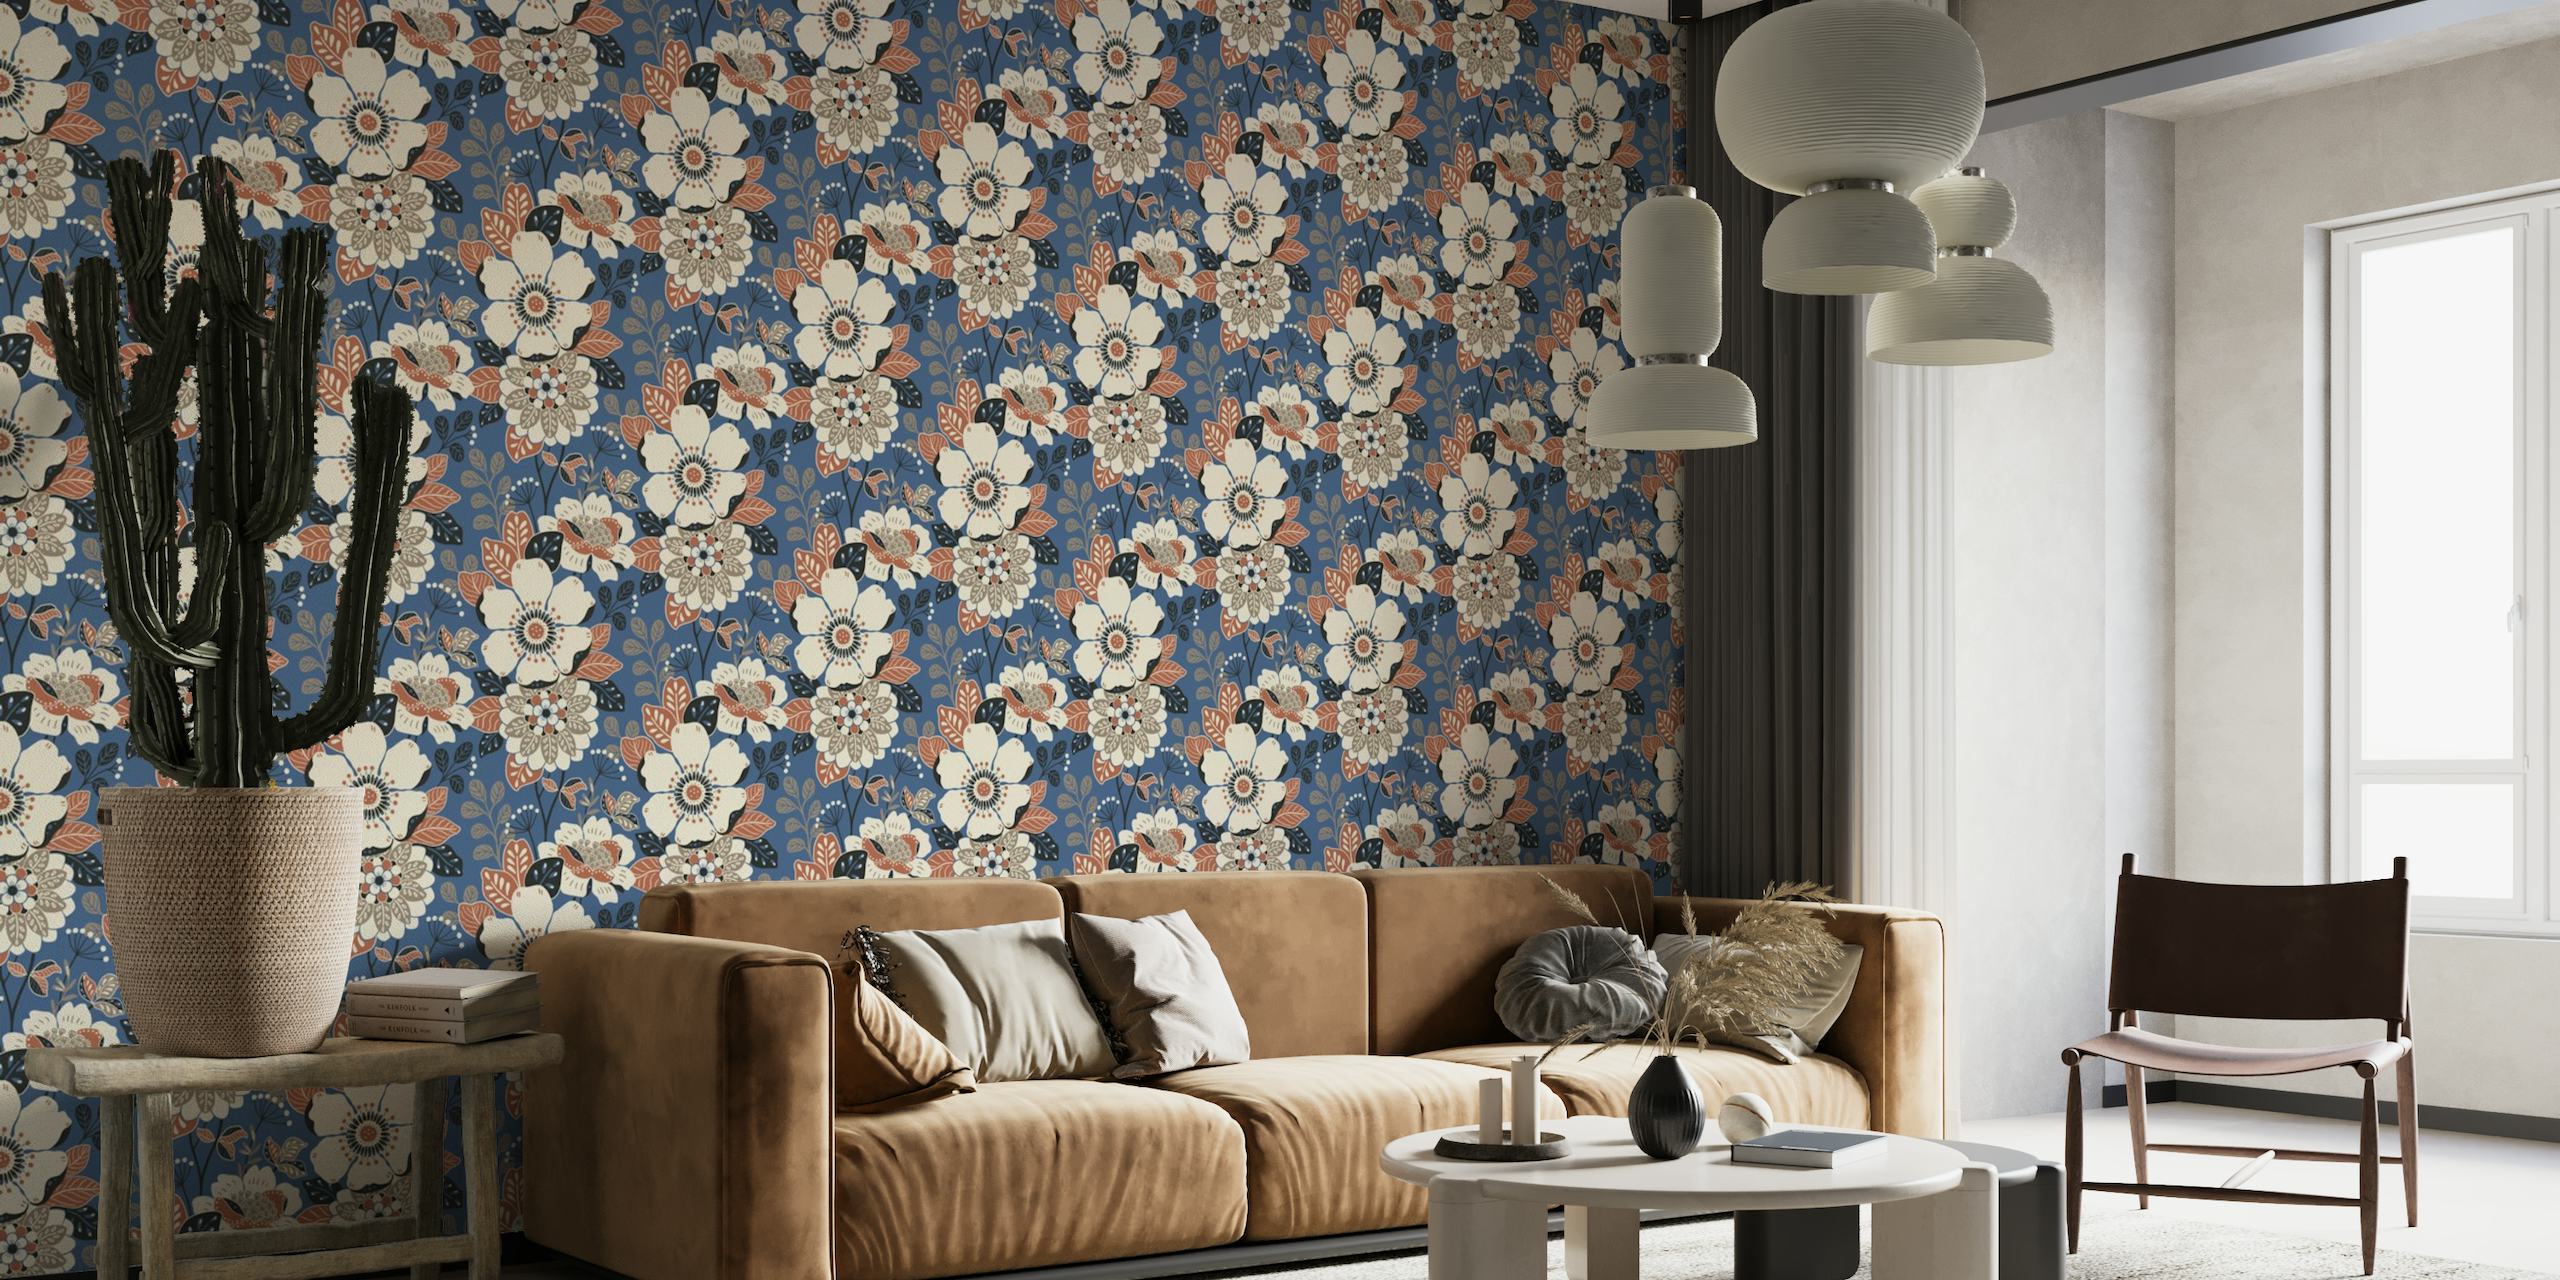 Moody Rustic Floral Fall - blue wall mural depicting an autumn-inspired rustic floral pattern